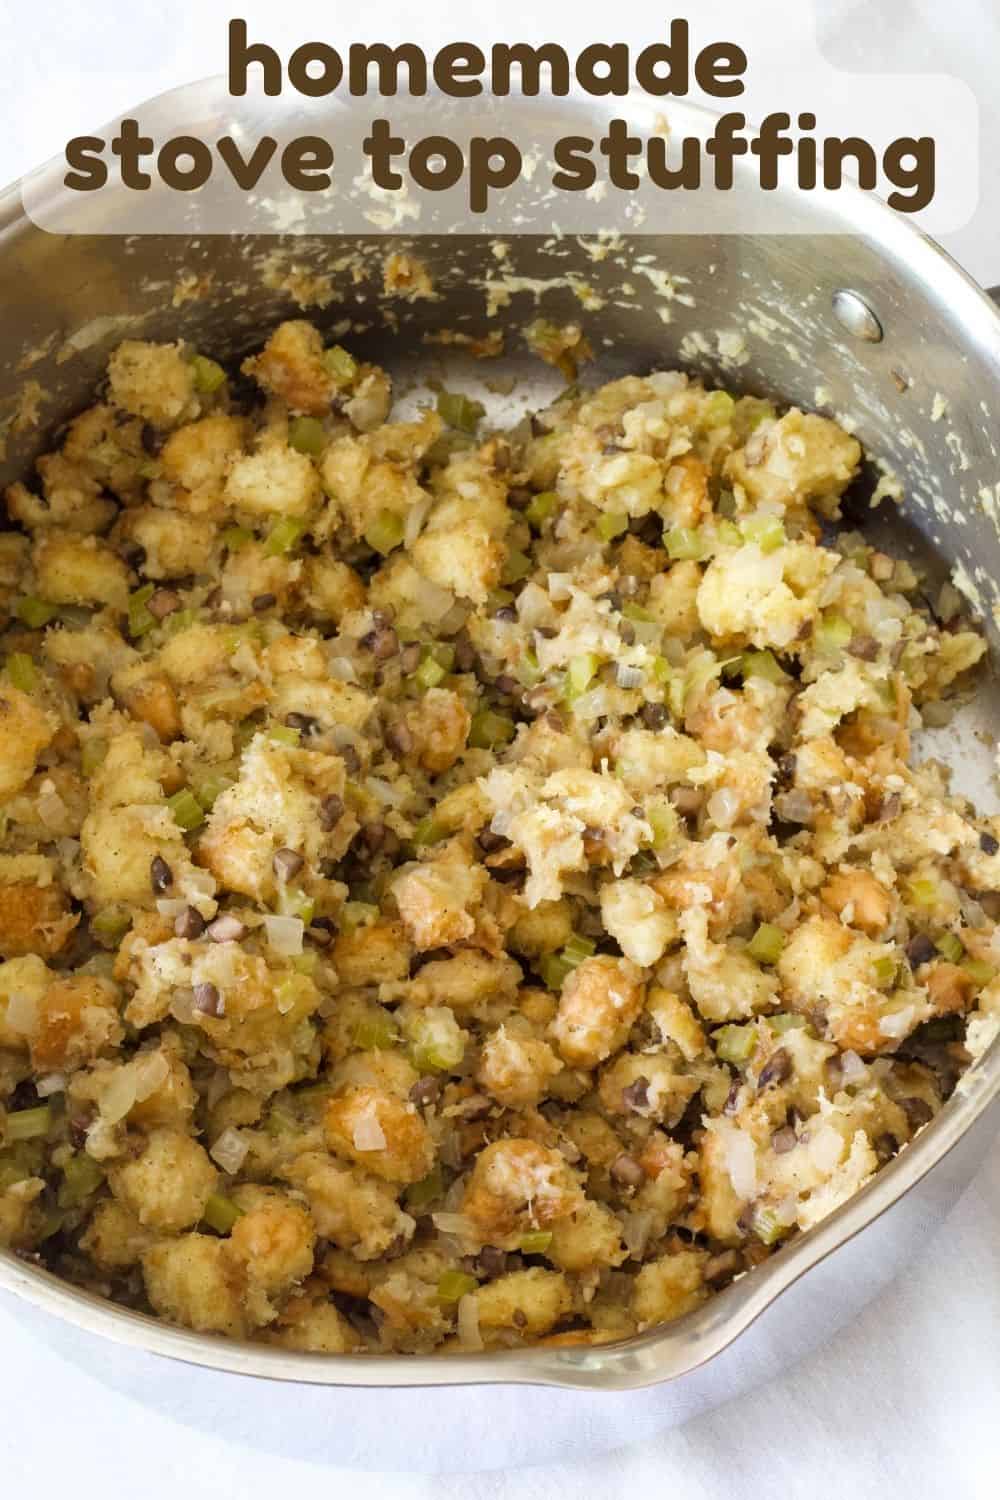 Homemade Stove Top Stuffing features dried bread, onion, celery, mushrooms, broth and seasonings. Fast, so tasty, and easier than you think! via @mindyscookingobsession